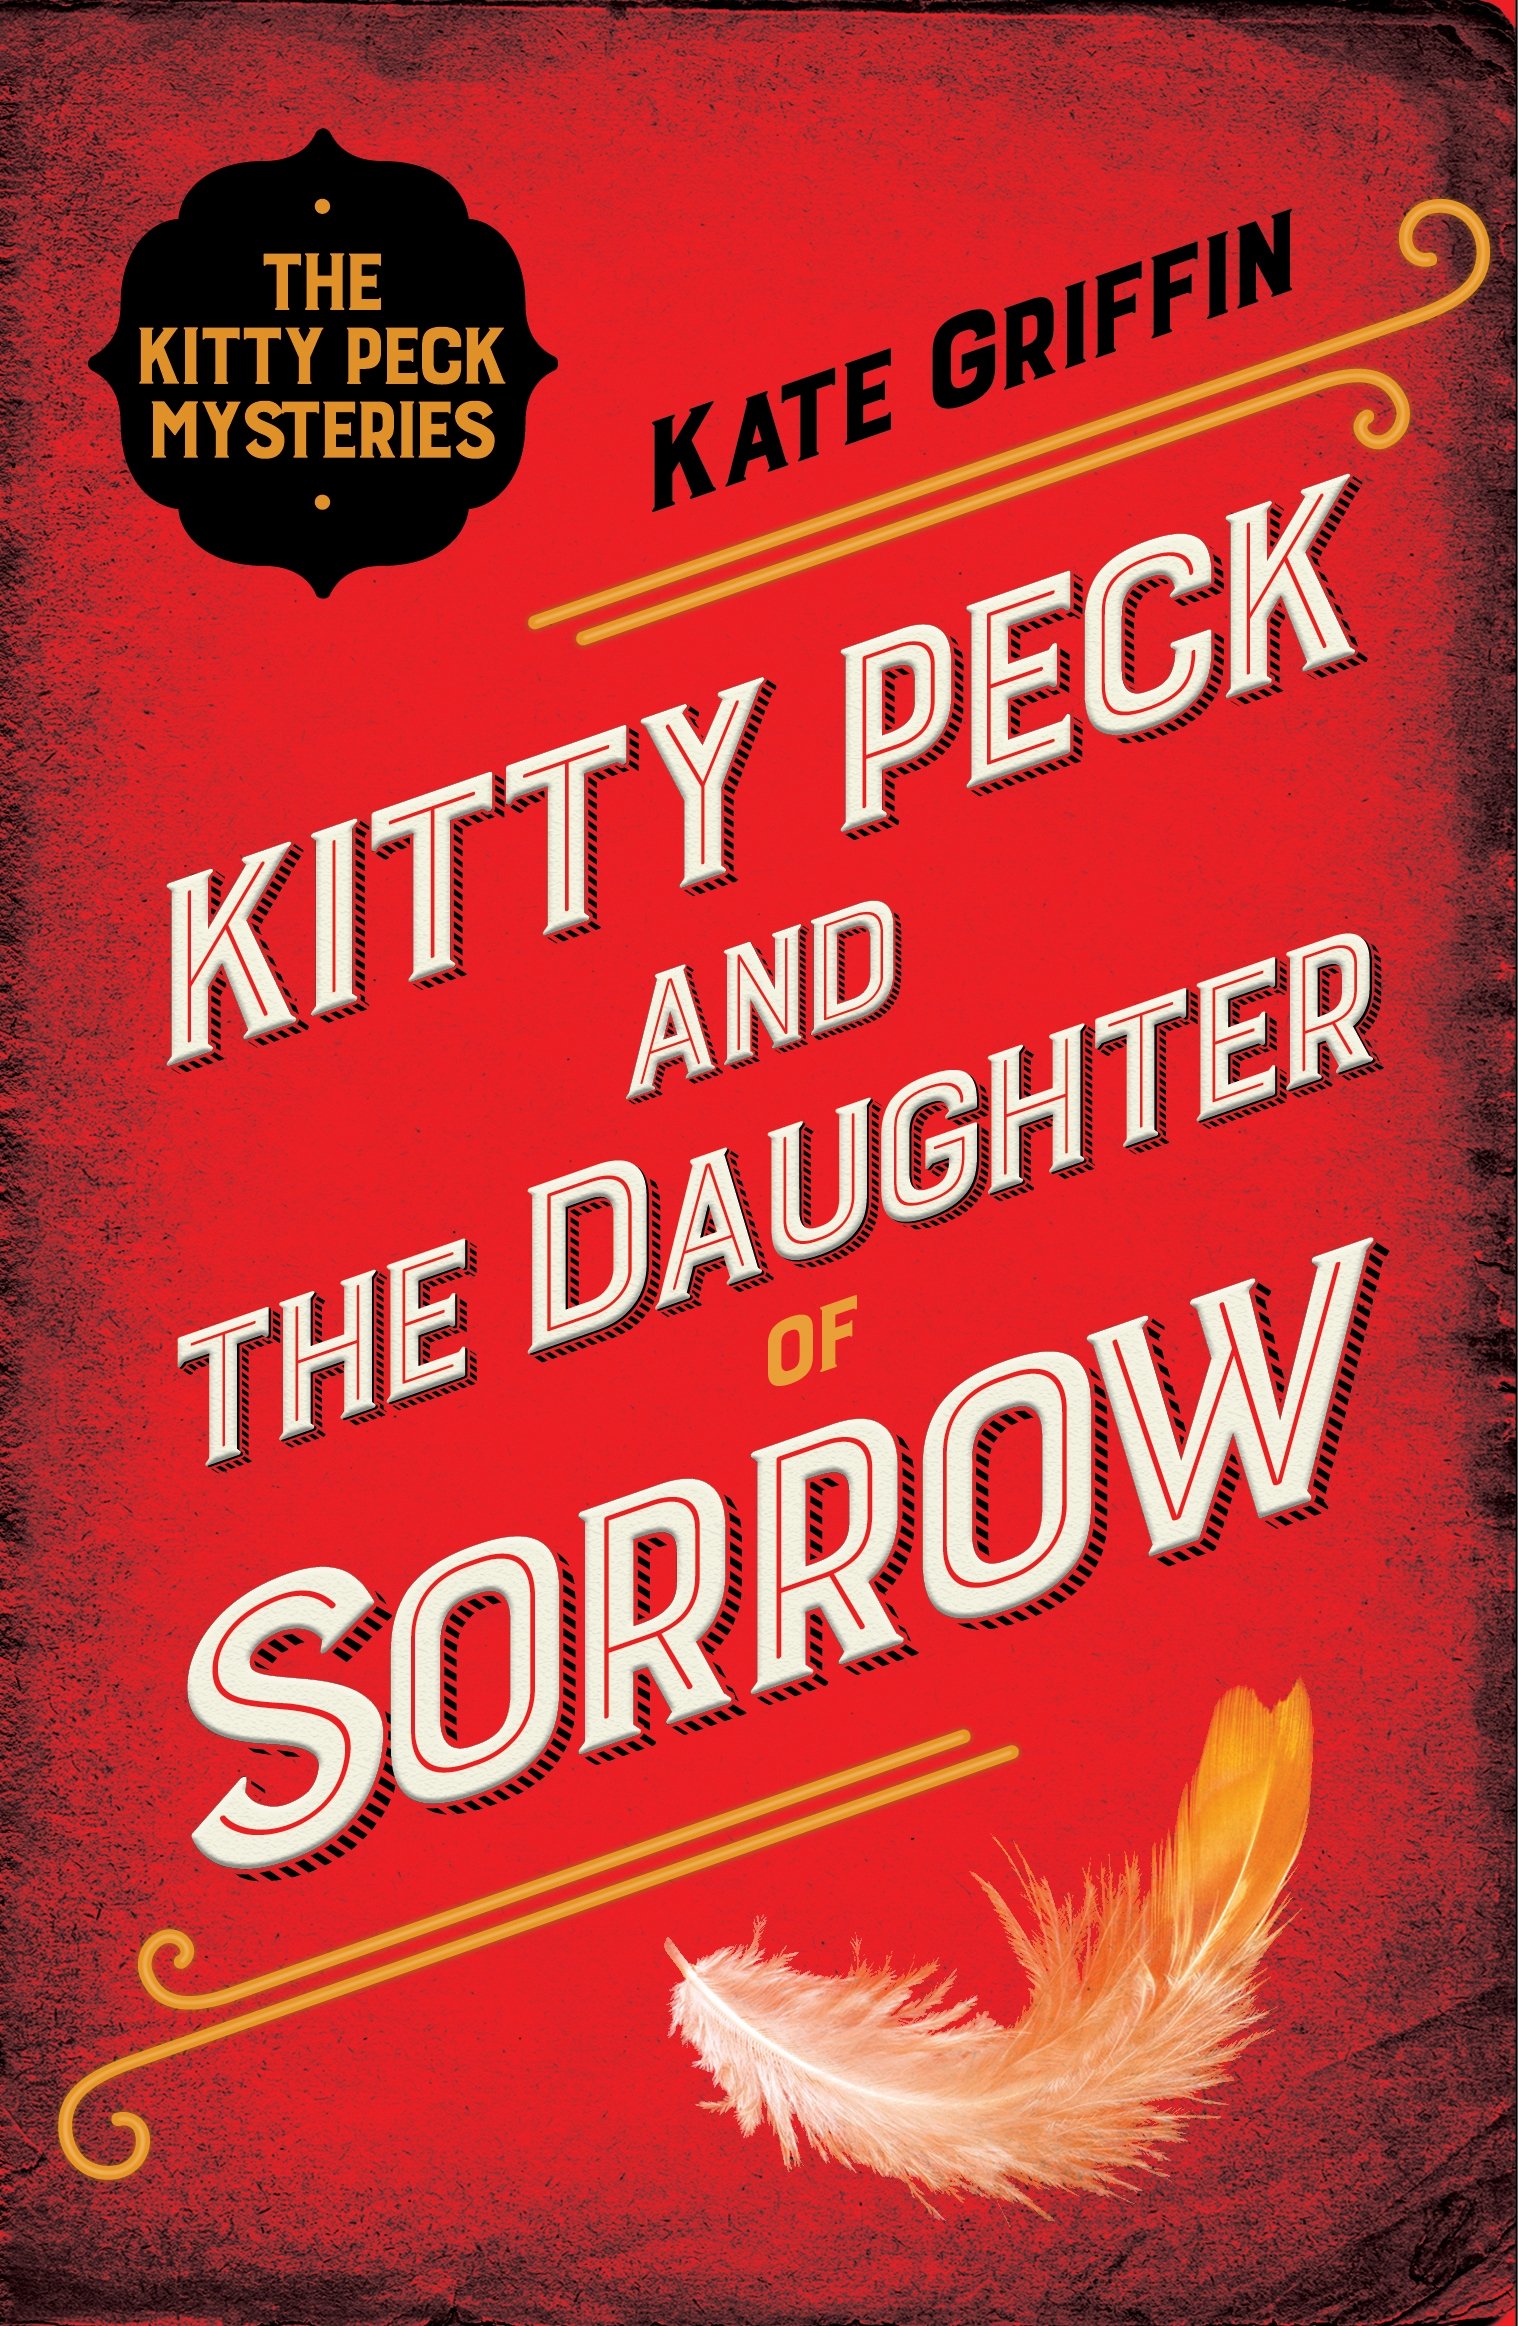 Vezi detalii pentru Kitty Peck and the Daughter of Sorrow | Kate Griffin